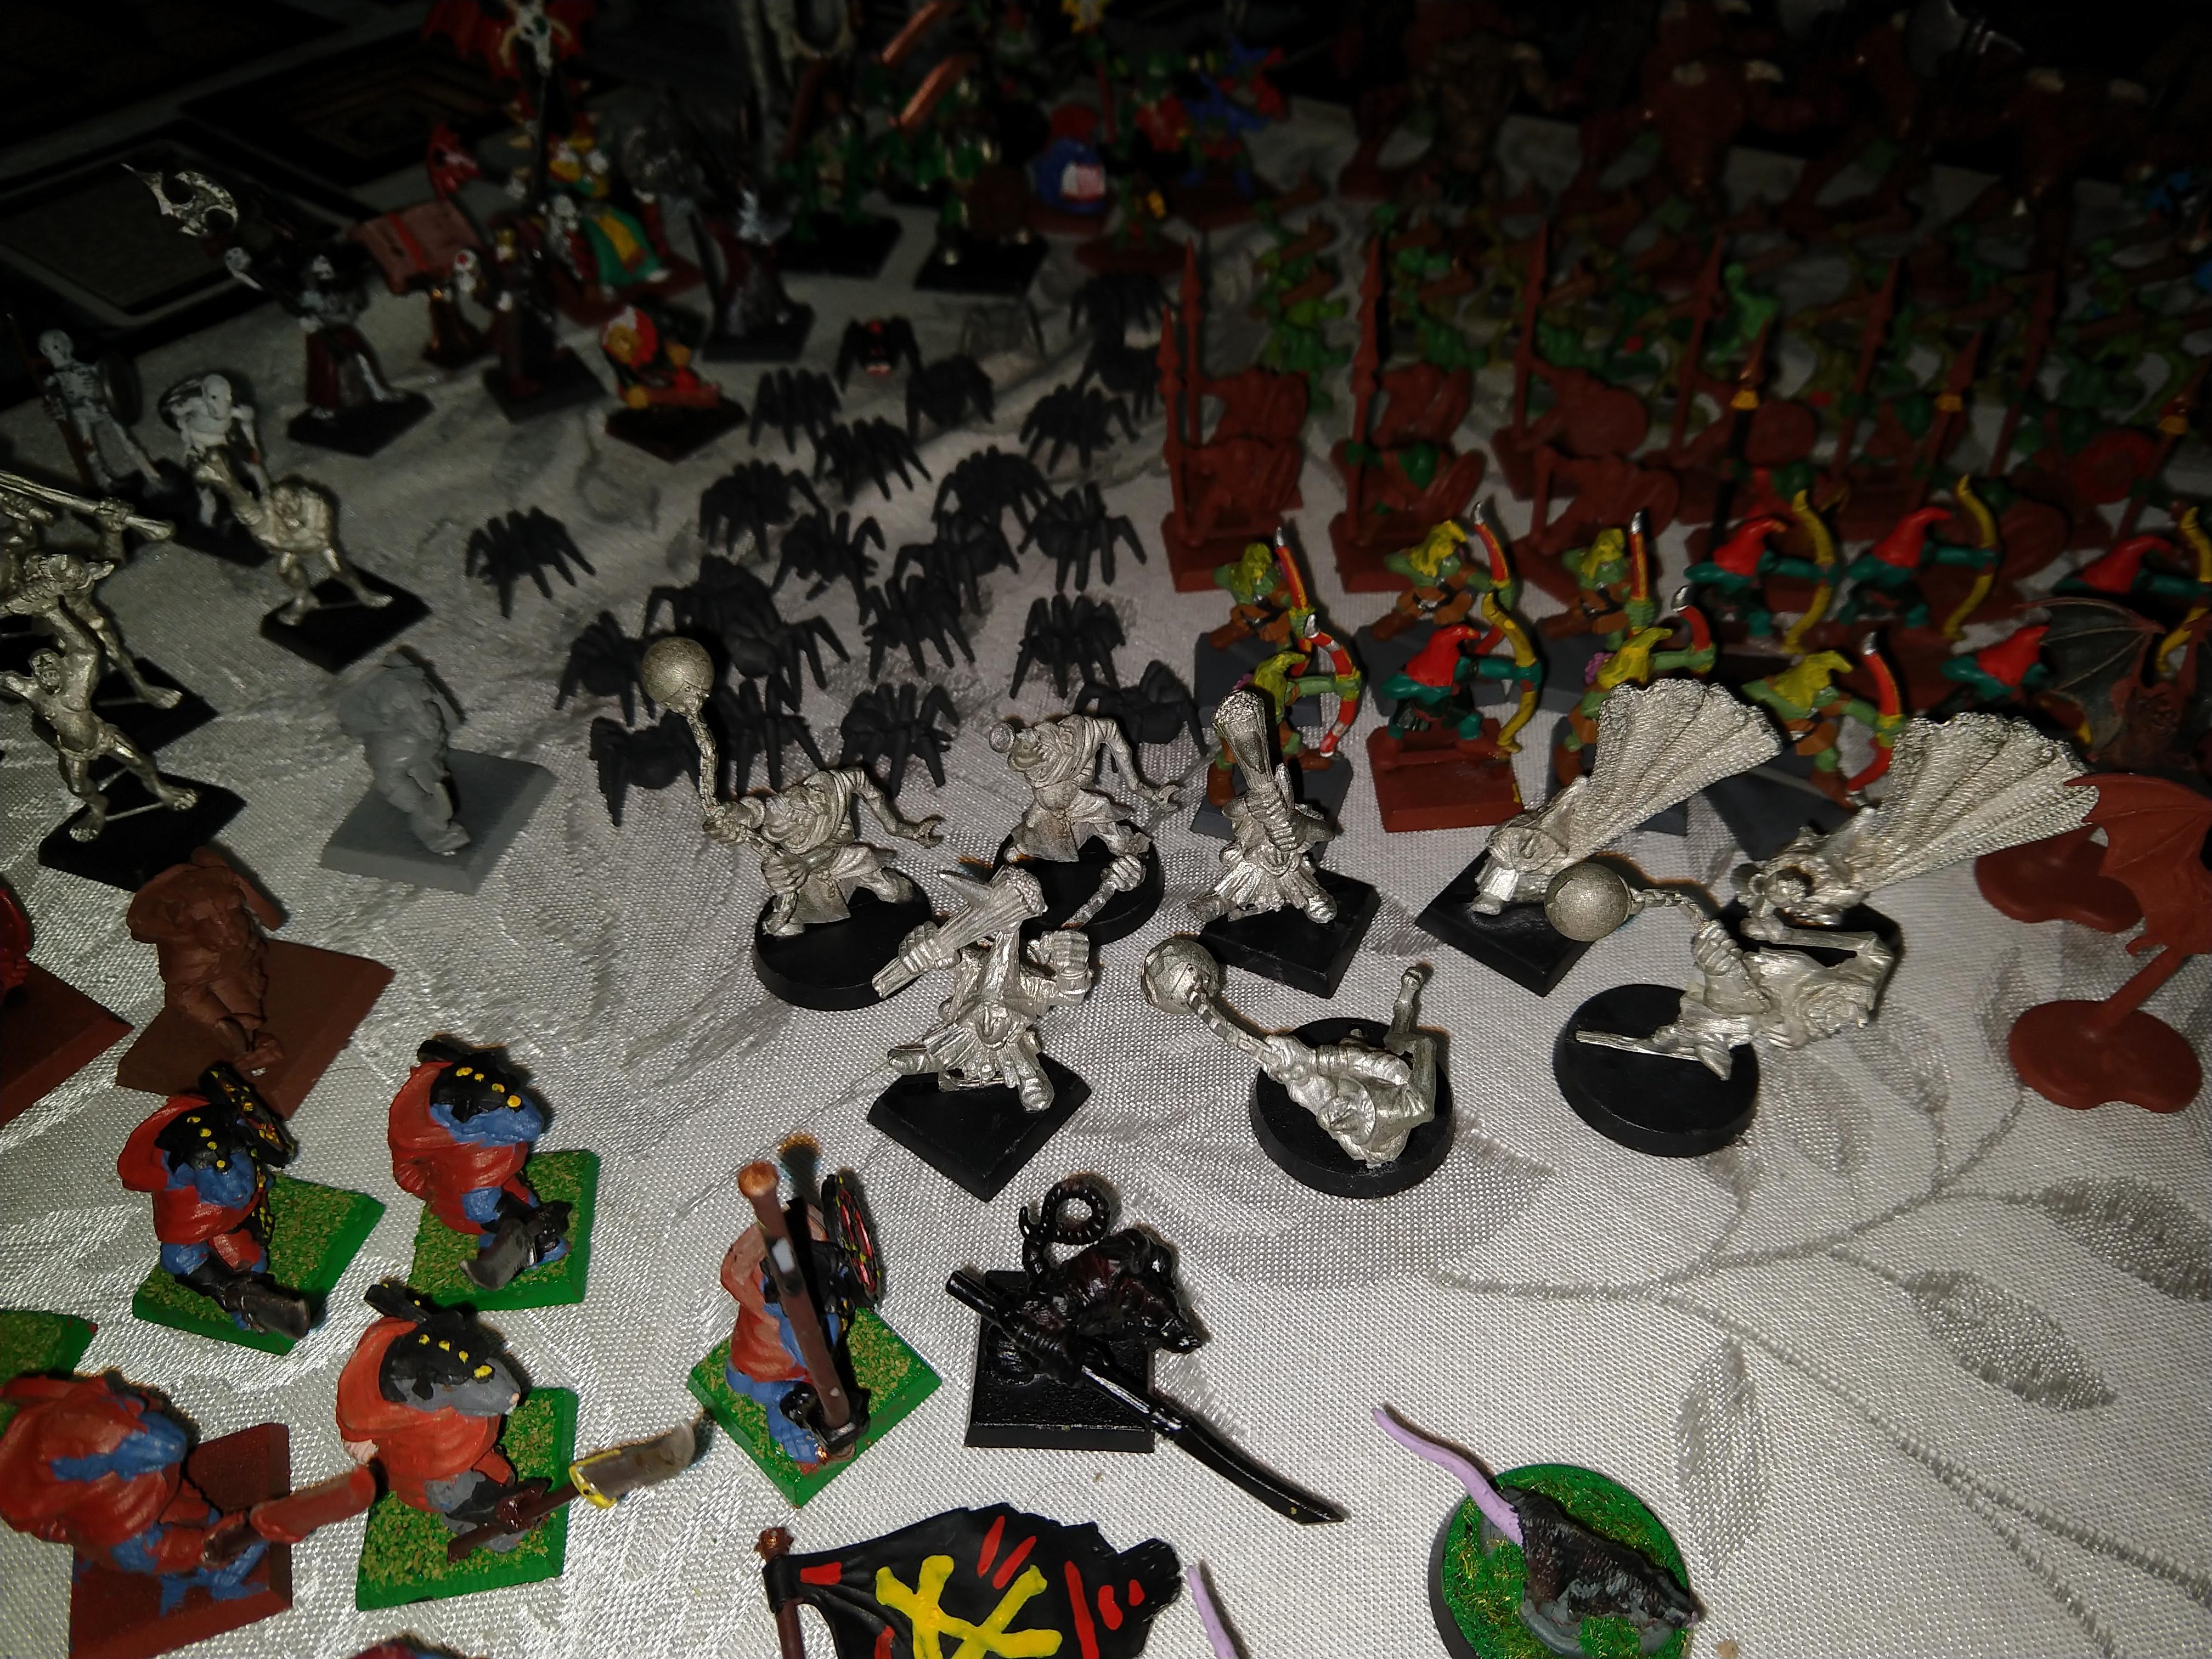 For Sale, Sale, Warhammer Quest